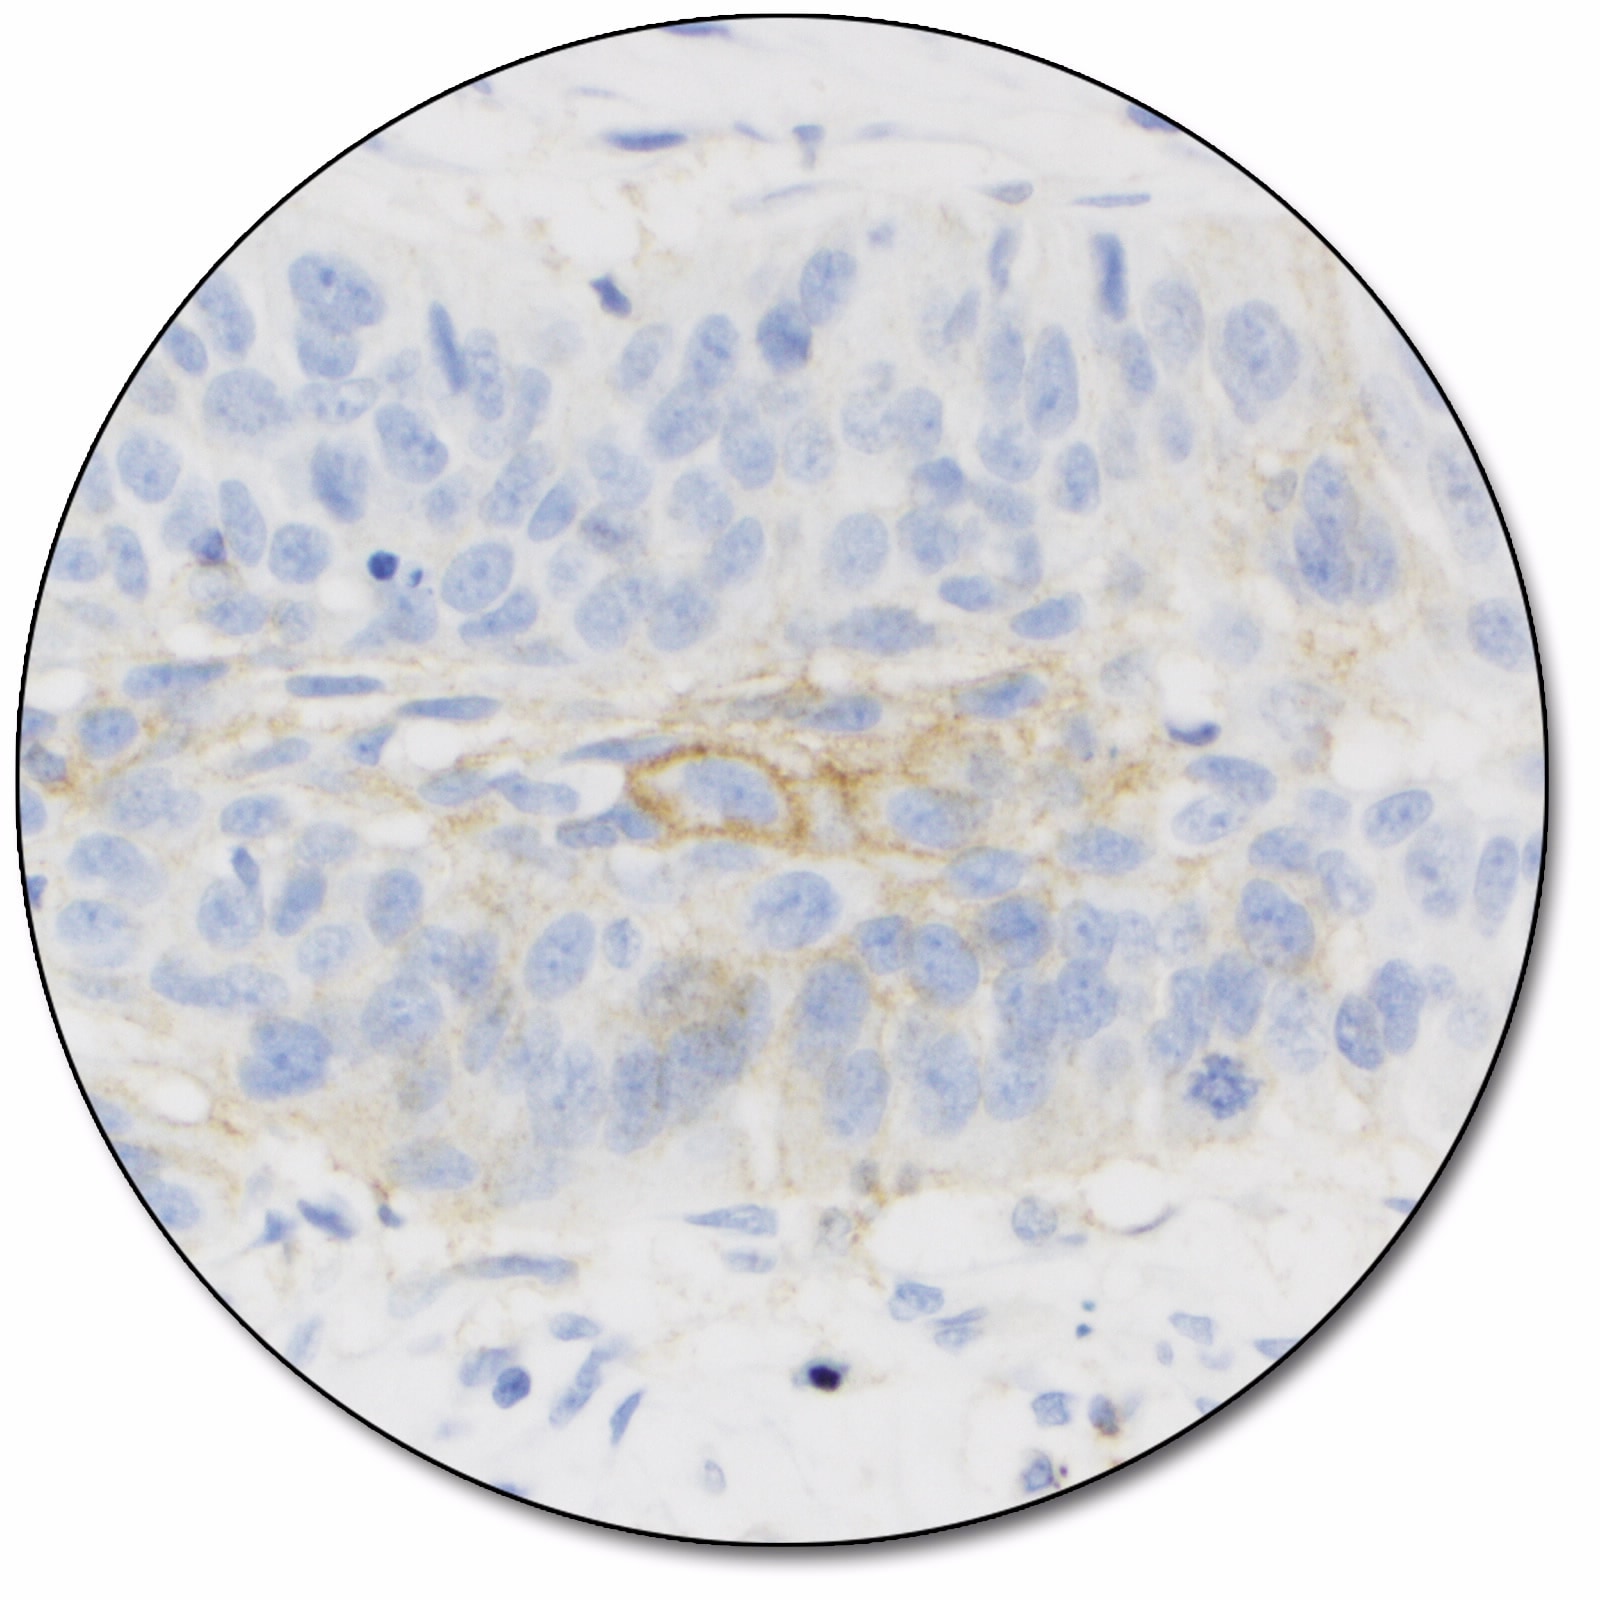 PD-L1 IHC 22C3 pharmDx「ダコ」：ダコ<br><br>Autostainer Link 48 用 PD-L1 検査キット